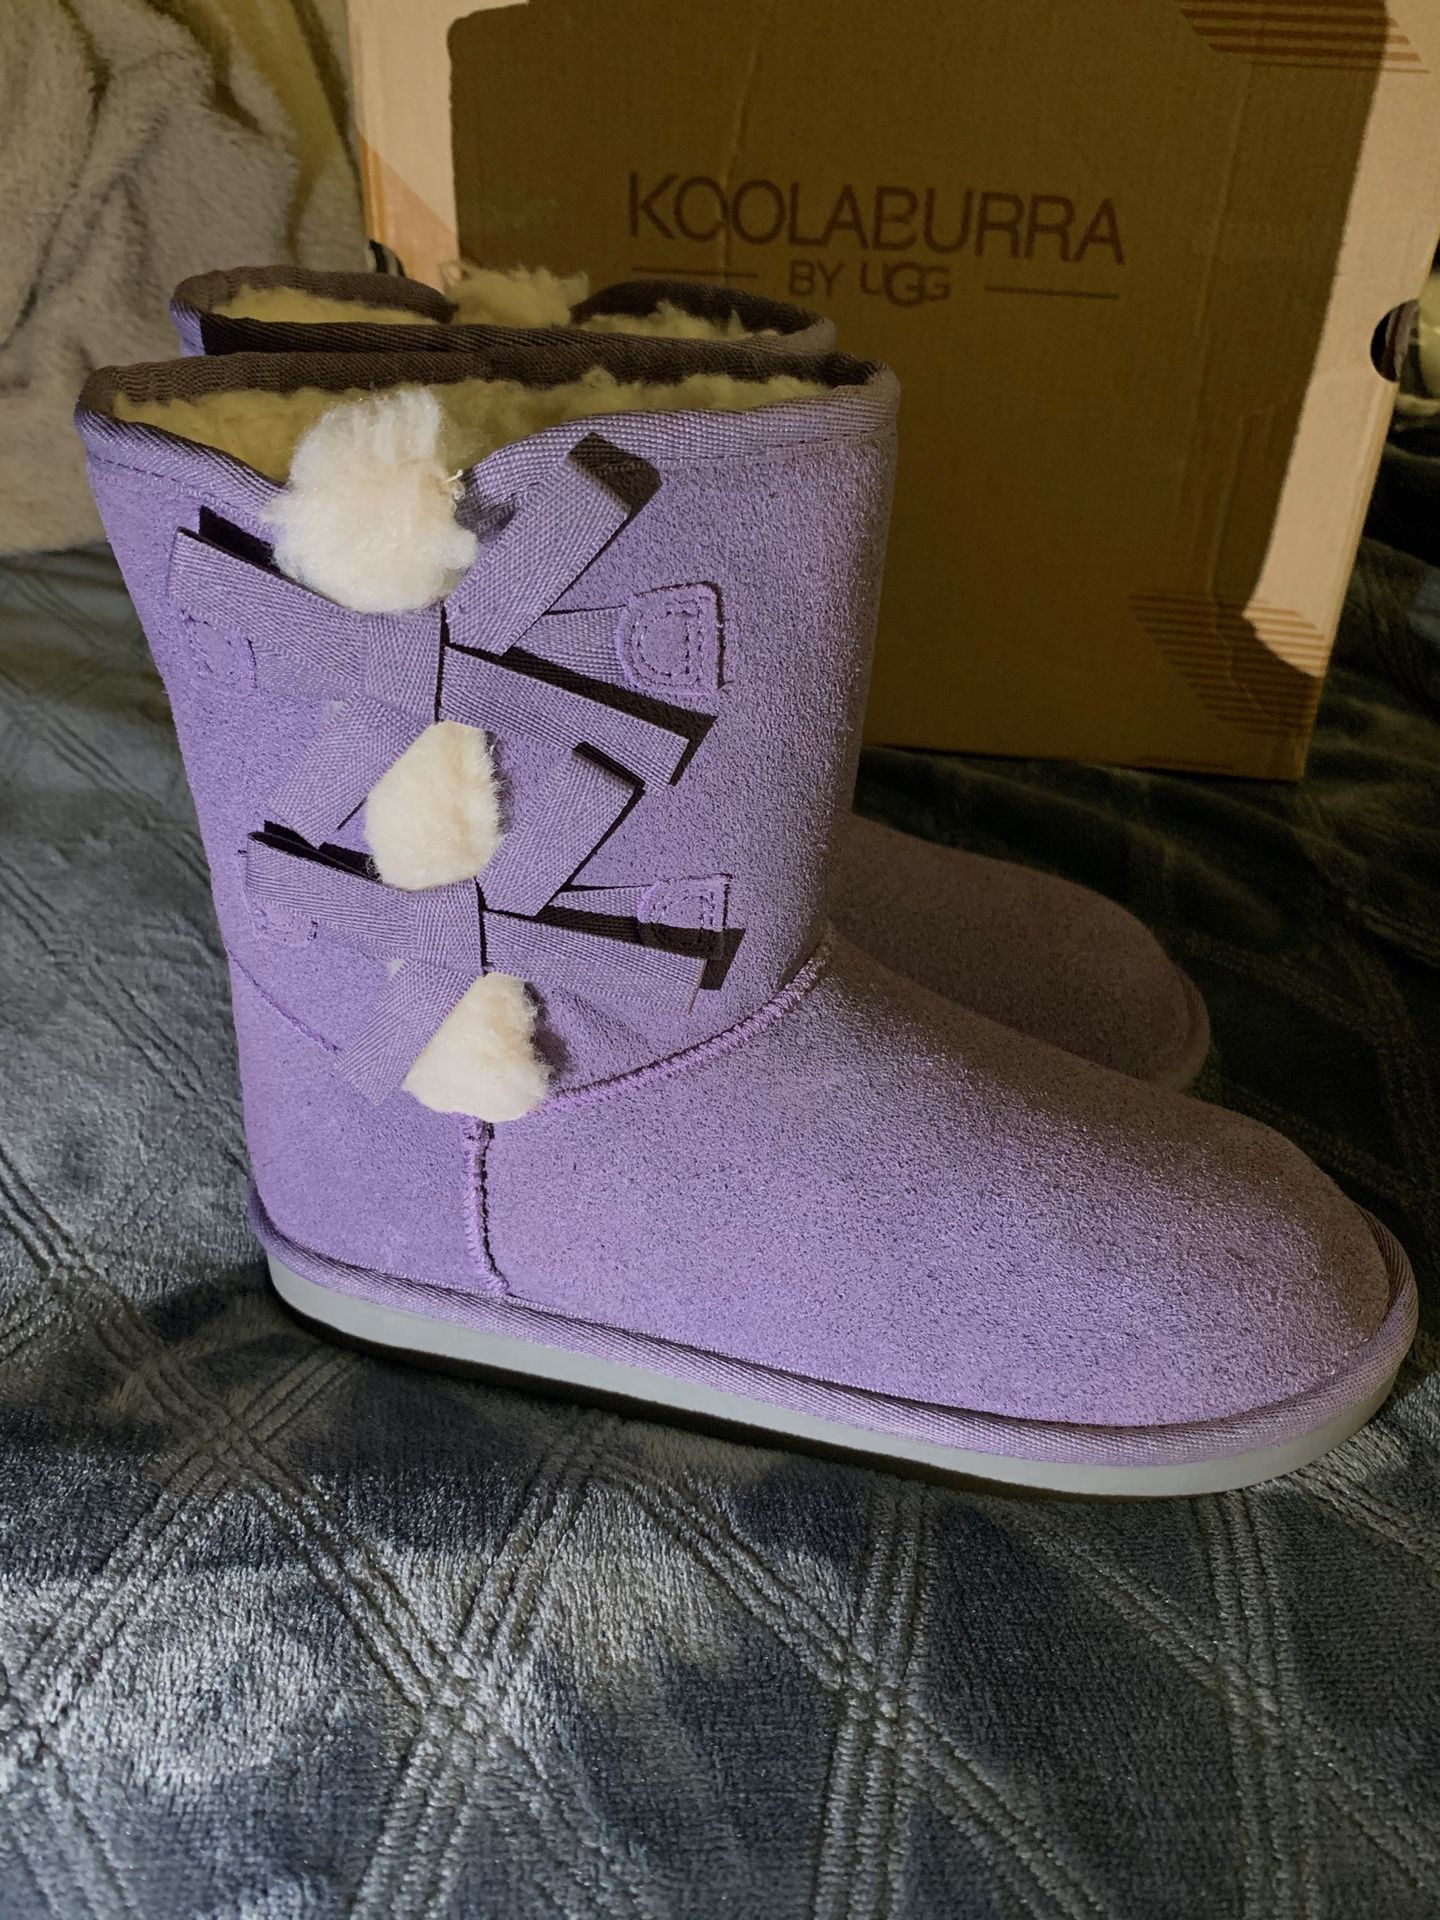 $35 NEW Girl’s Koolaburra by UGG Boots size 4Y